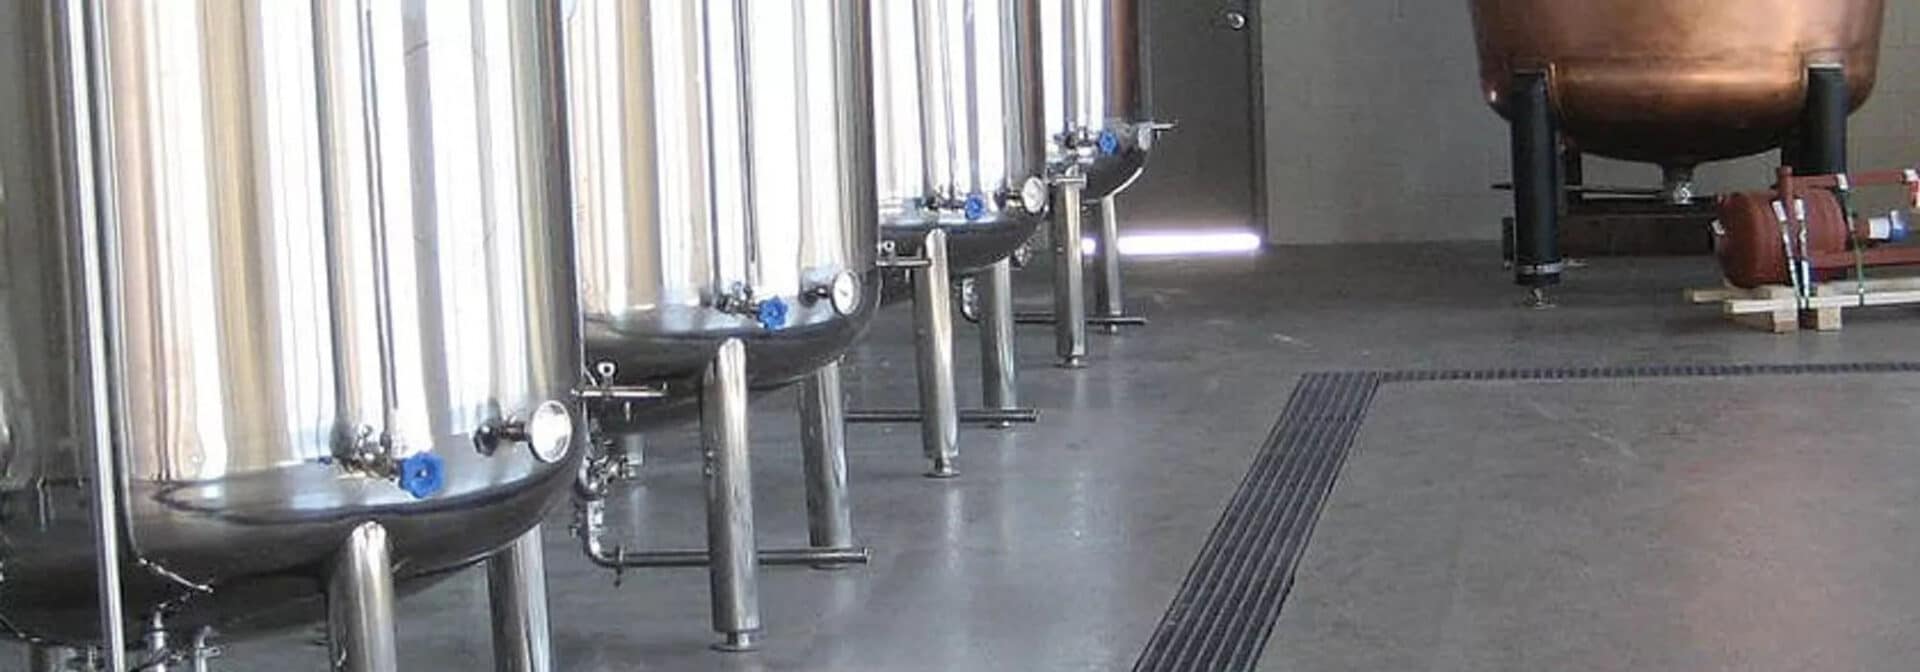 trench drain system in a brewery or distillery